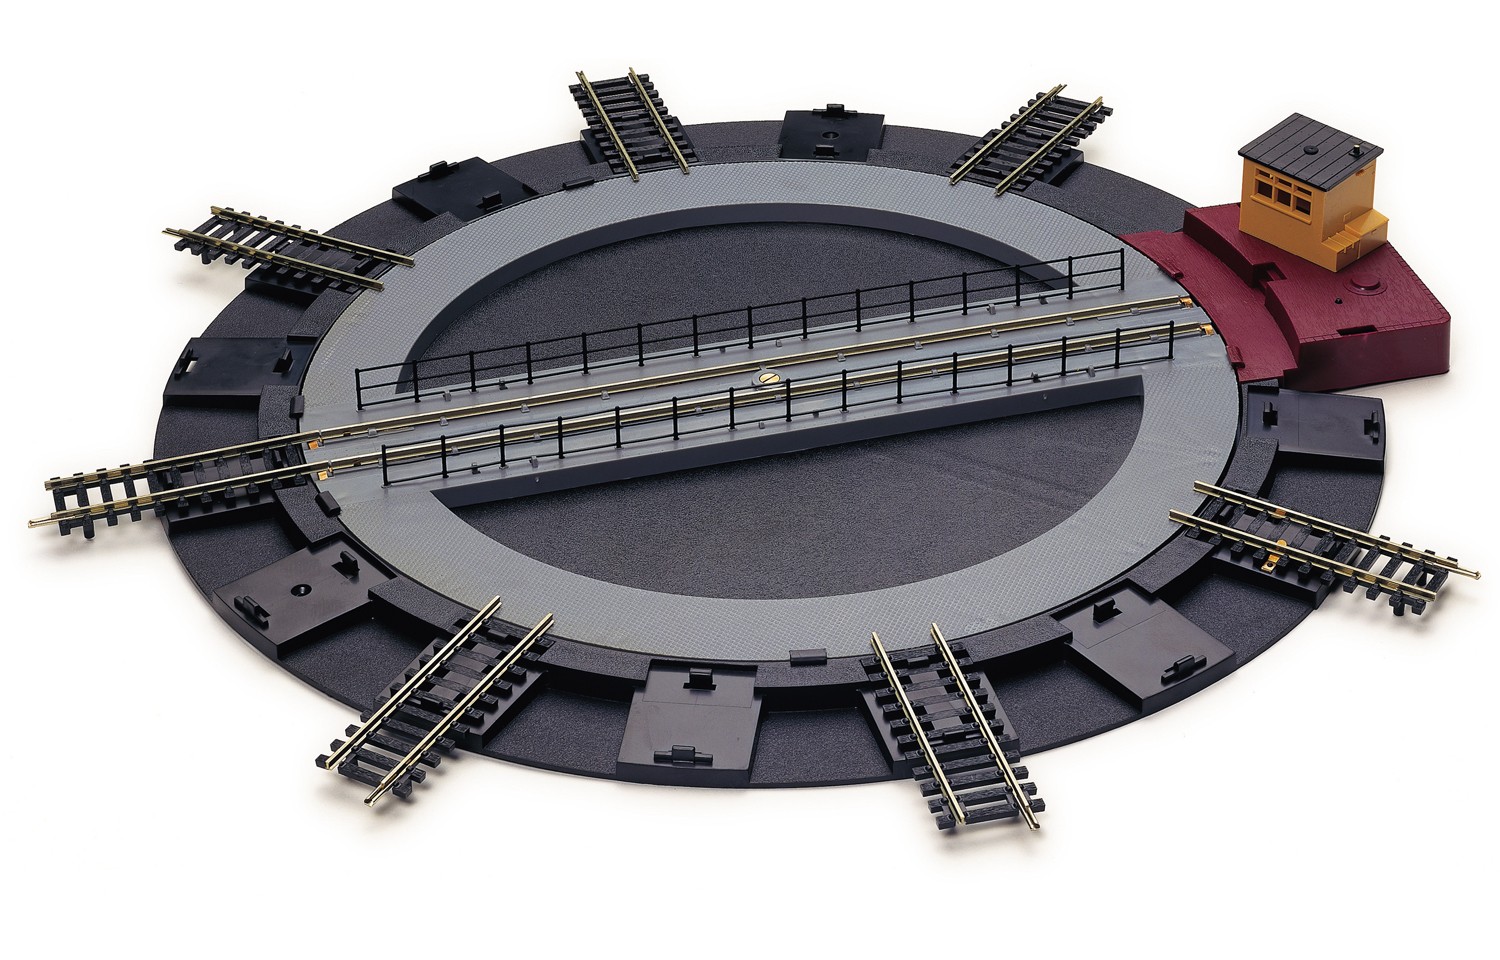 Hornby R070 Electric Turntable with Switch and 7 pcs Access Tracks (SPECIAL PRICE) (For Hornby OO / 1:76 Scale Standard Systems)